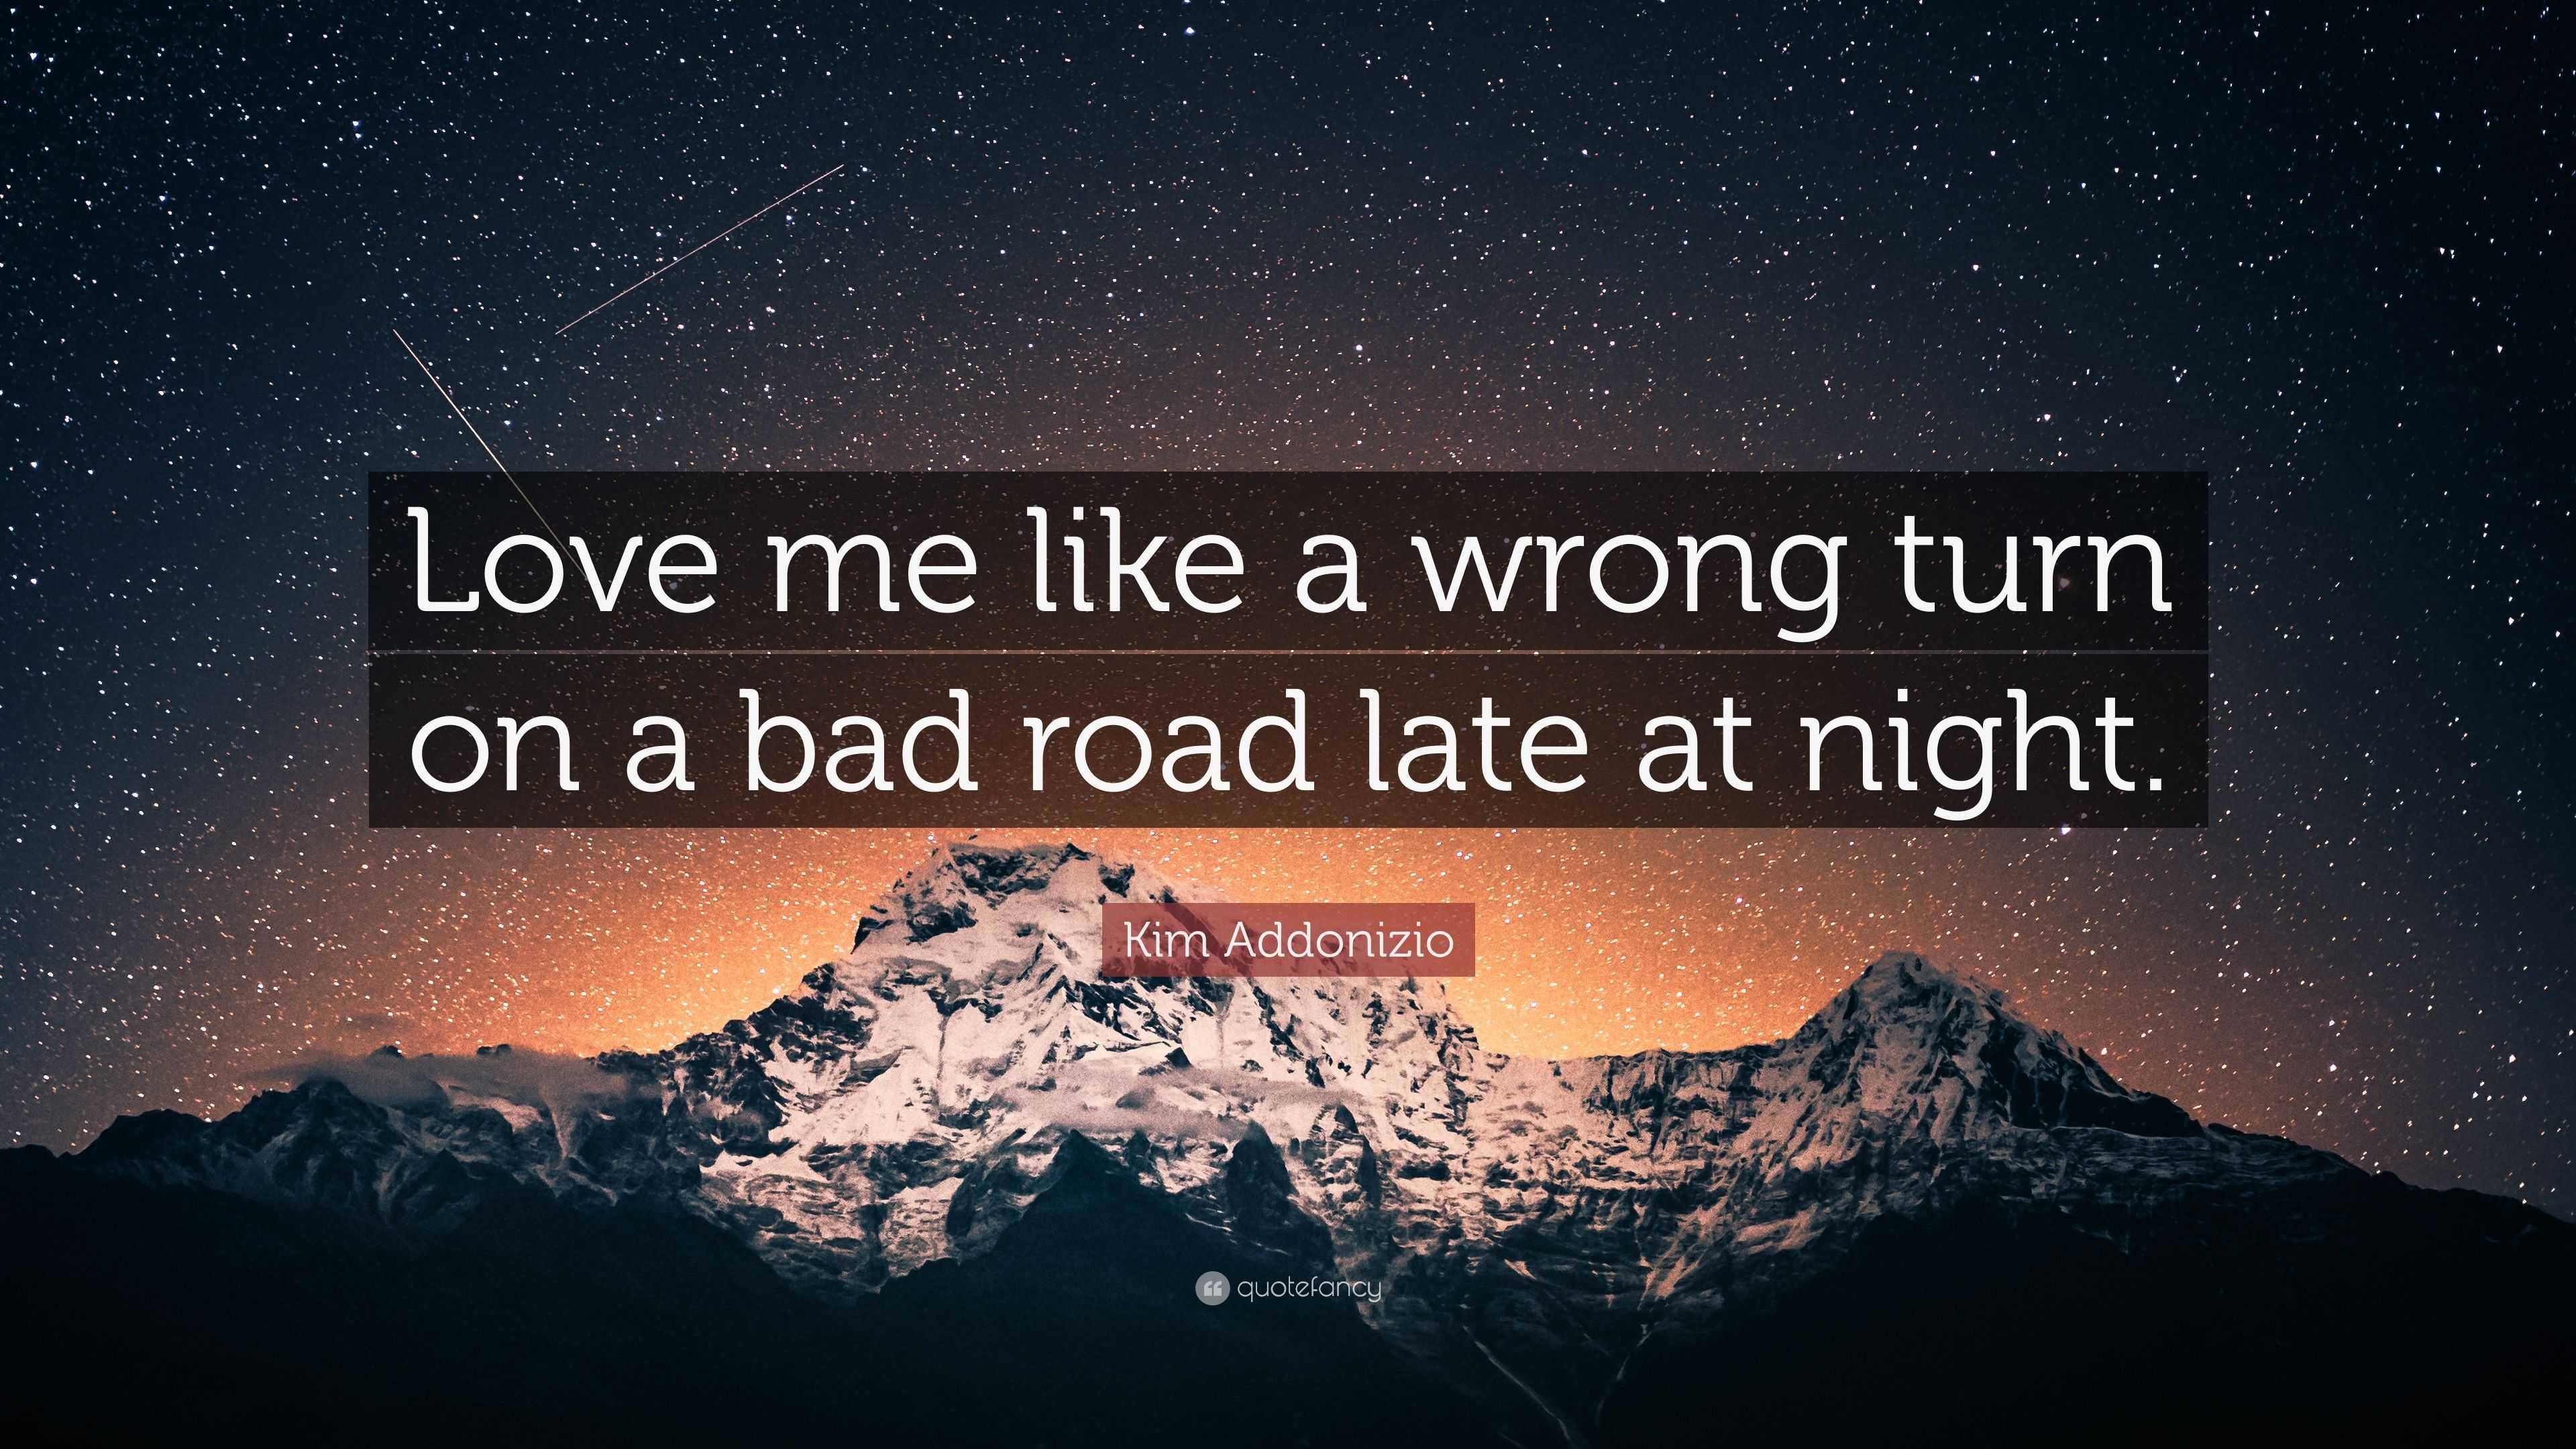 Kim Addonizio Quote “Love me like a wrong turn on a bad road late